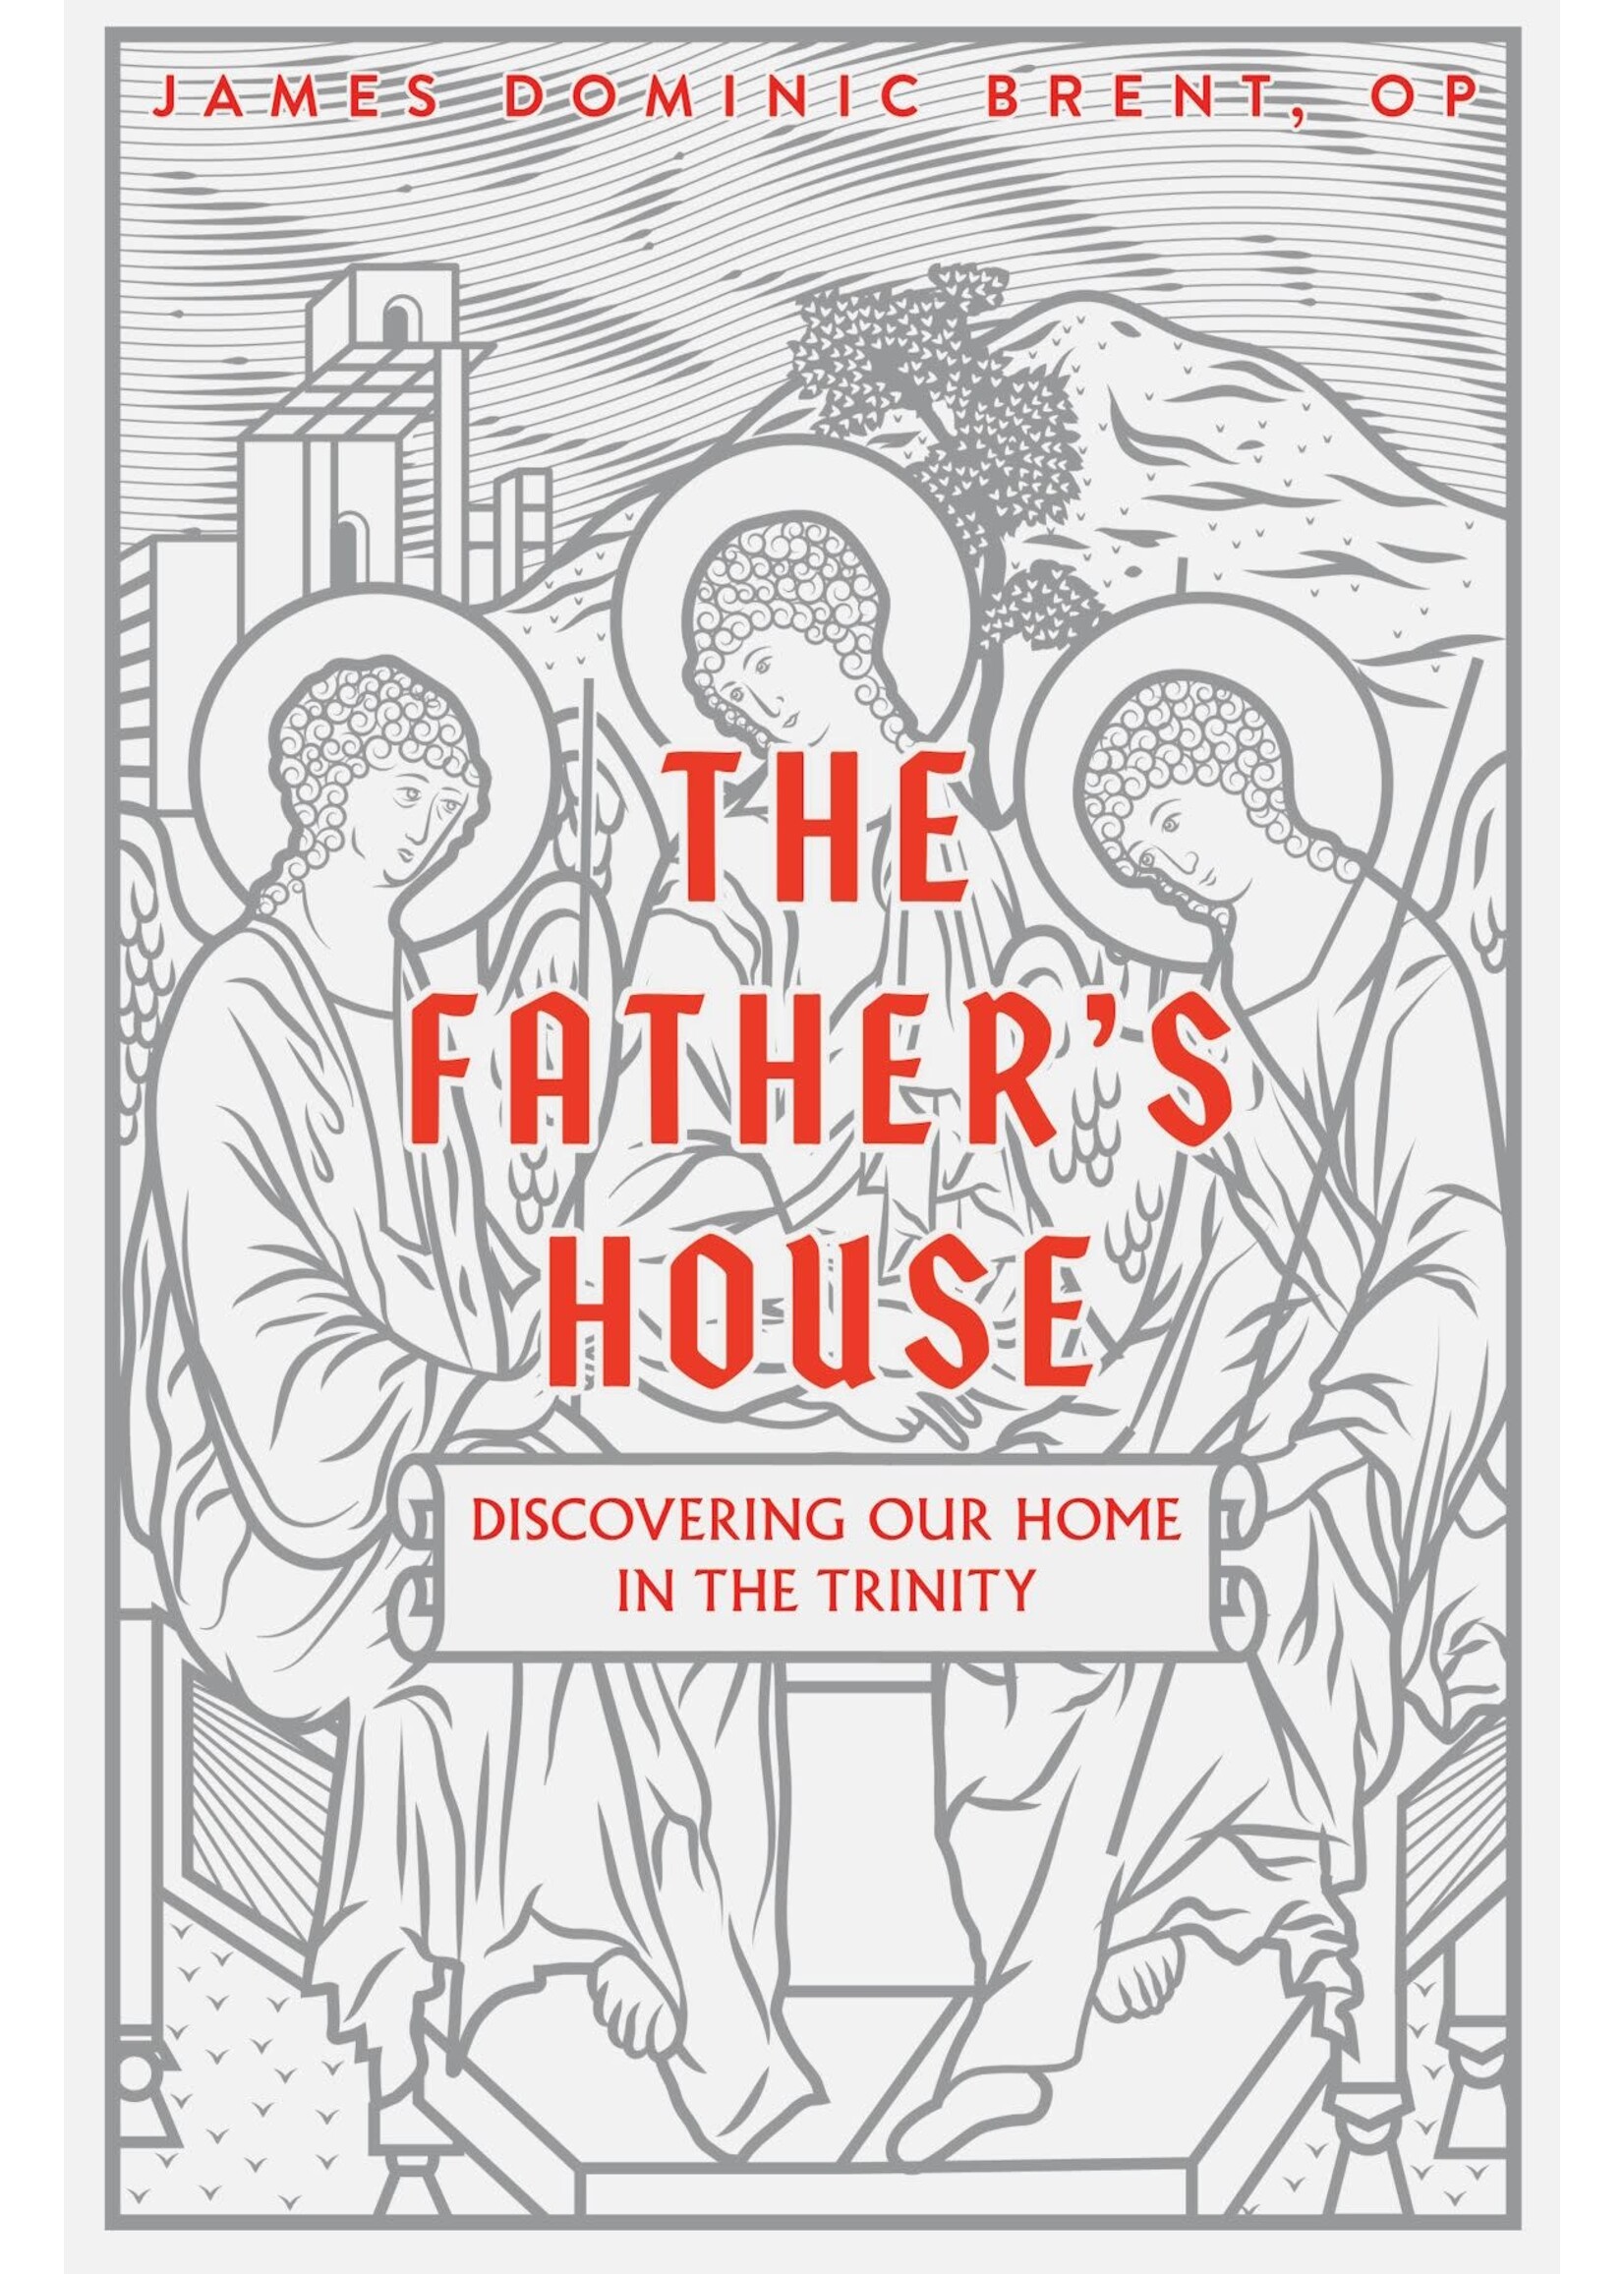 The Father's House - Discovering Our Home In The Trinity